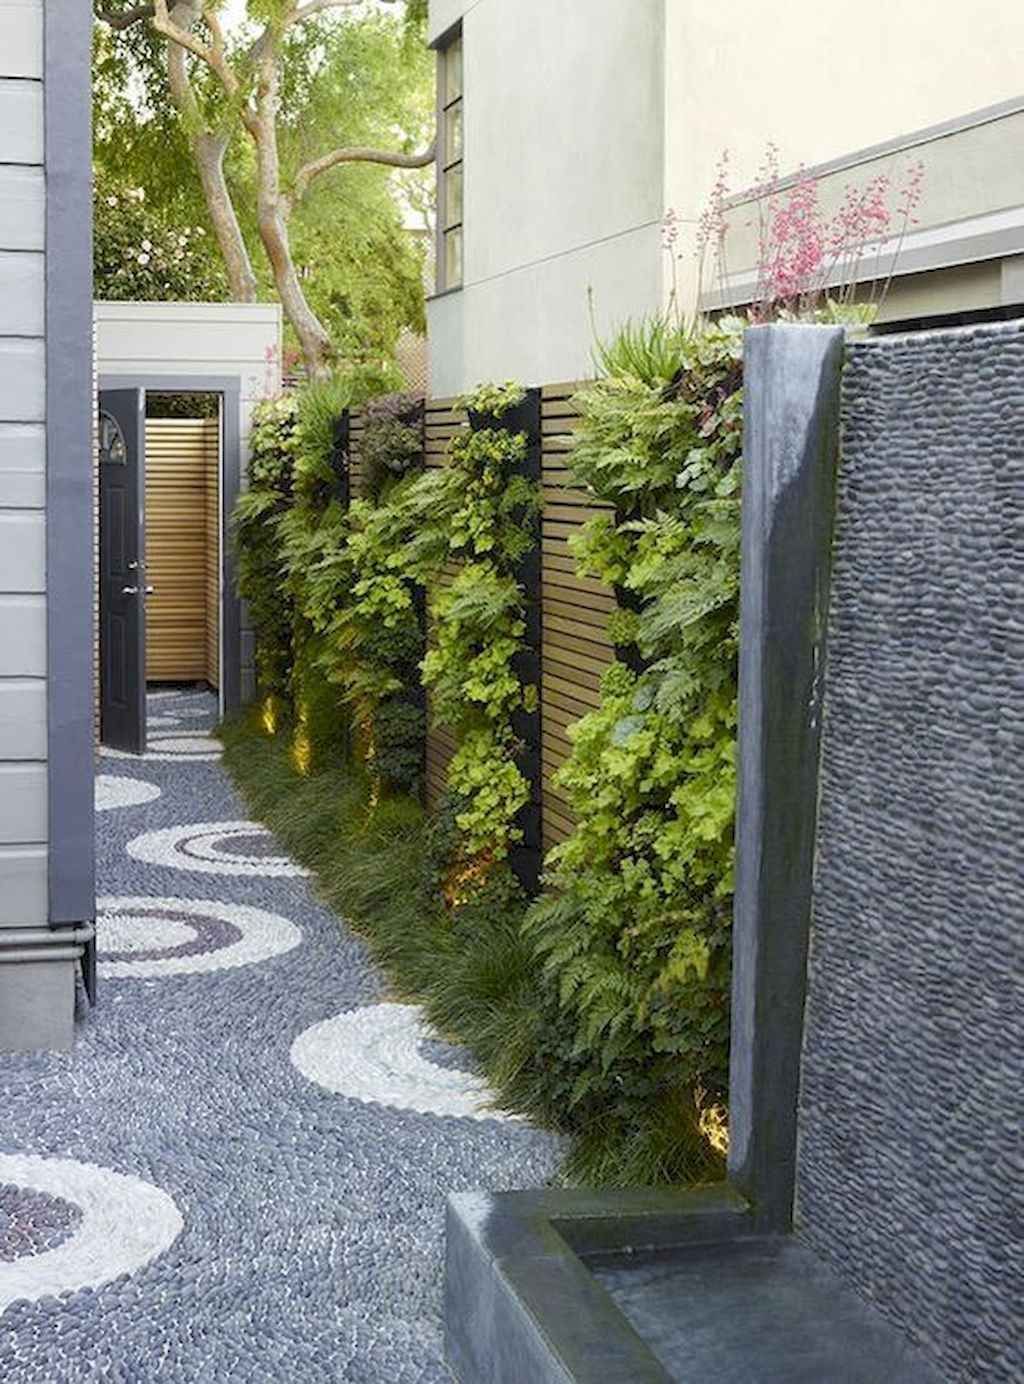 90 Awesome Garden Path and Walkways Design For Your Amazing Garden -   21 garden design Wall awesome ideas